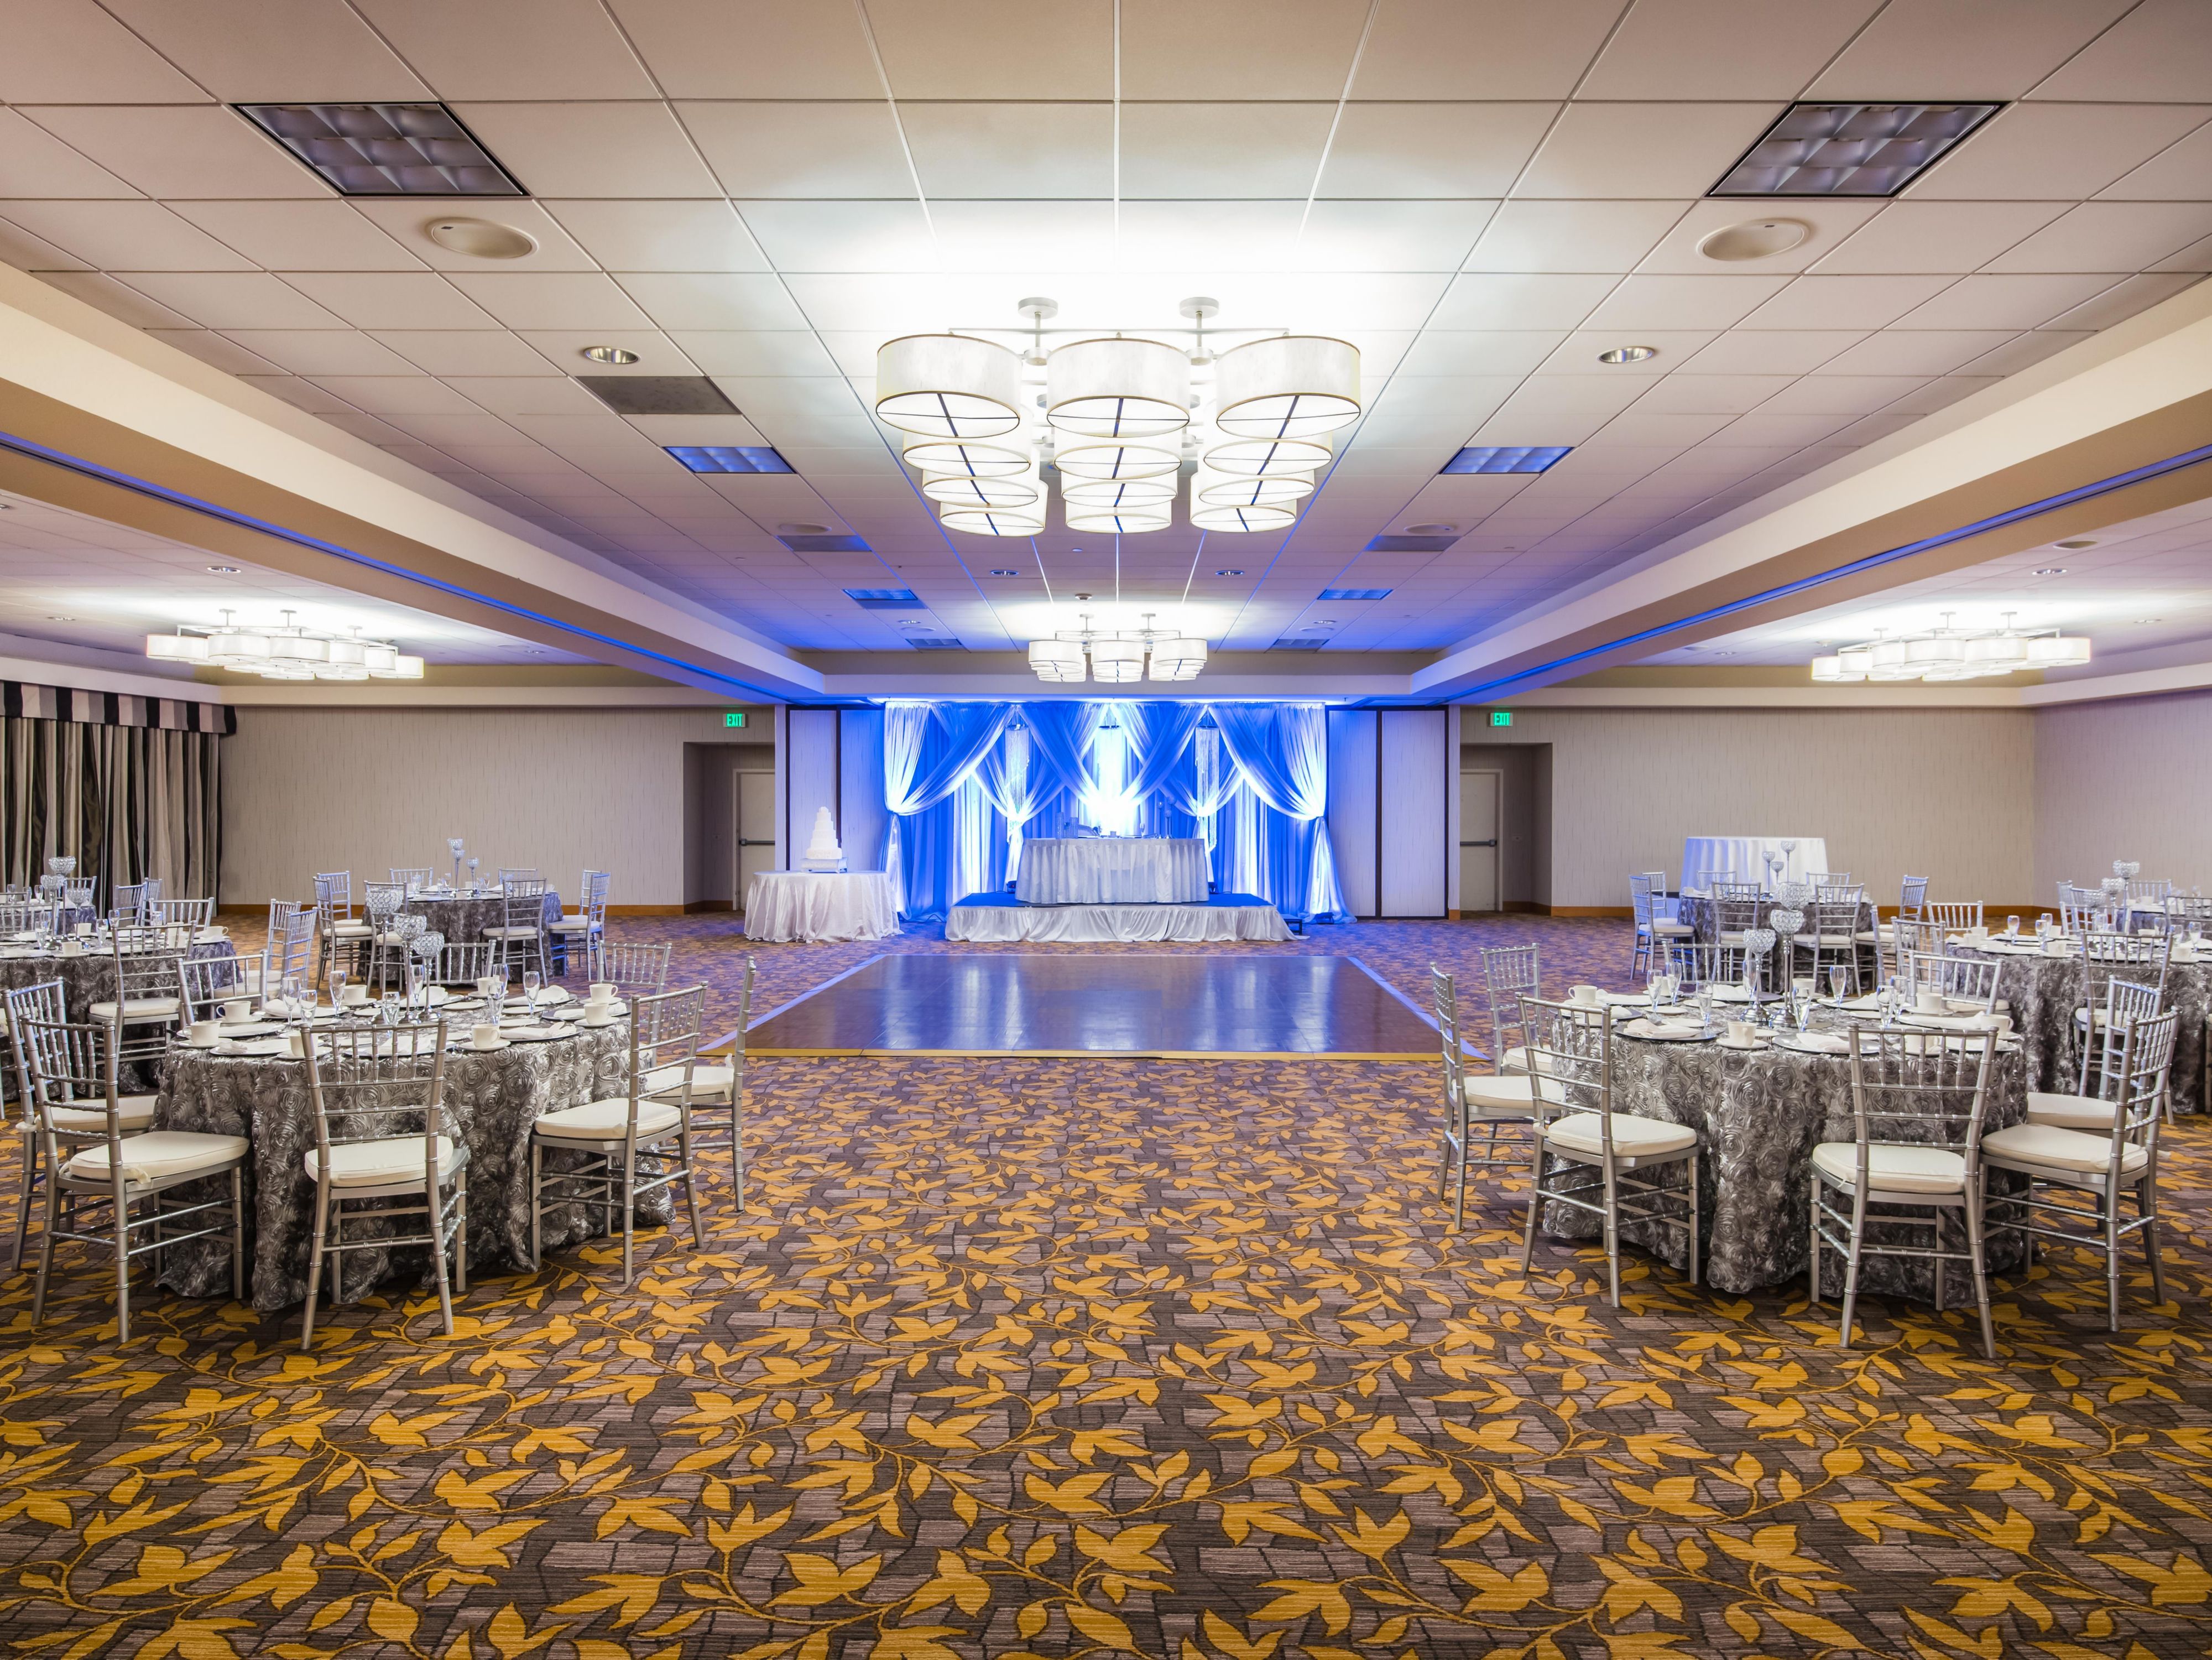 The Crowne Plaza San Francisco Airport is now booking social events for Weddings, Holiday Parties, Quinceaneras, Birthday Parties and other socially distanced events. 